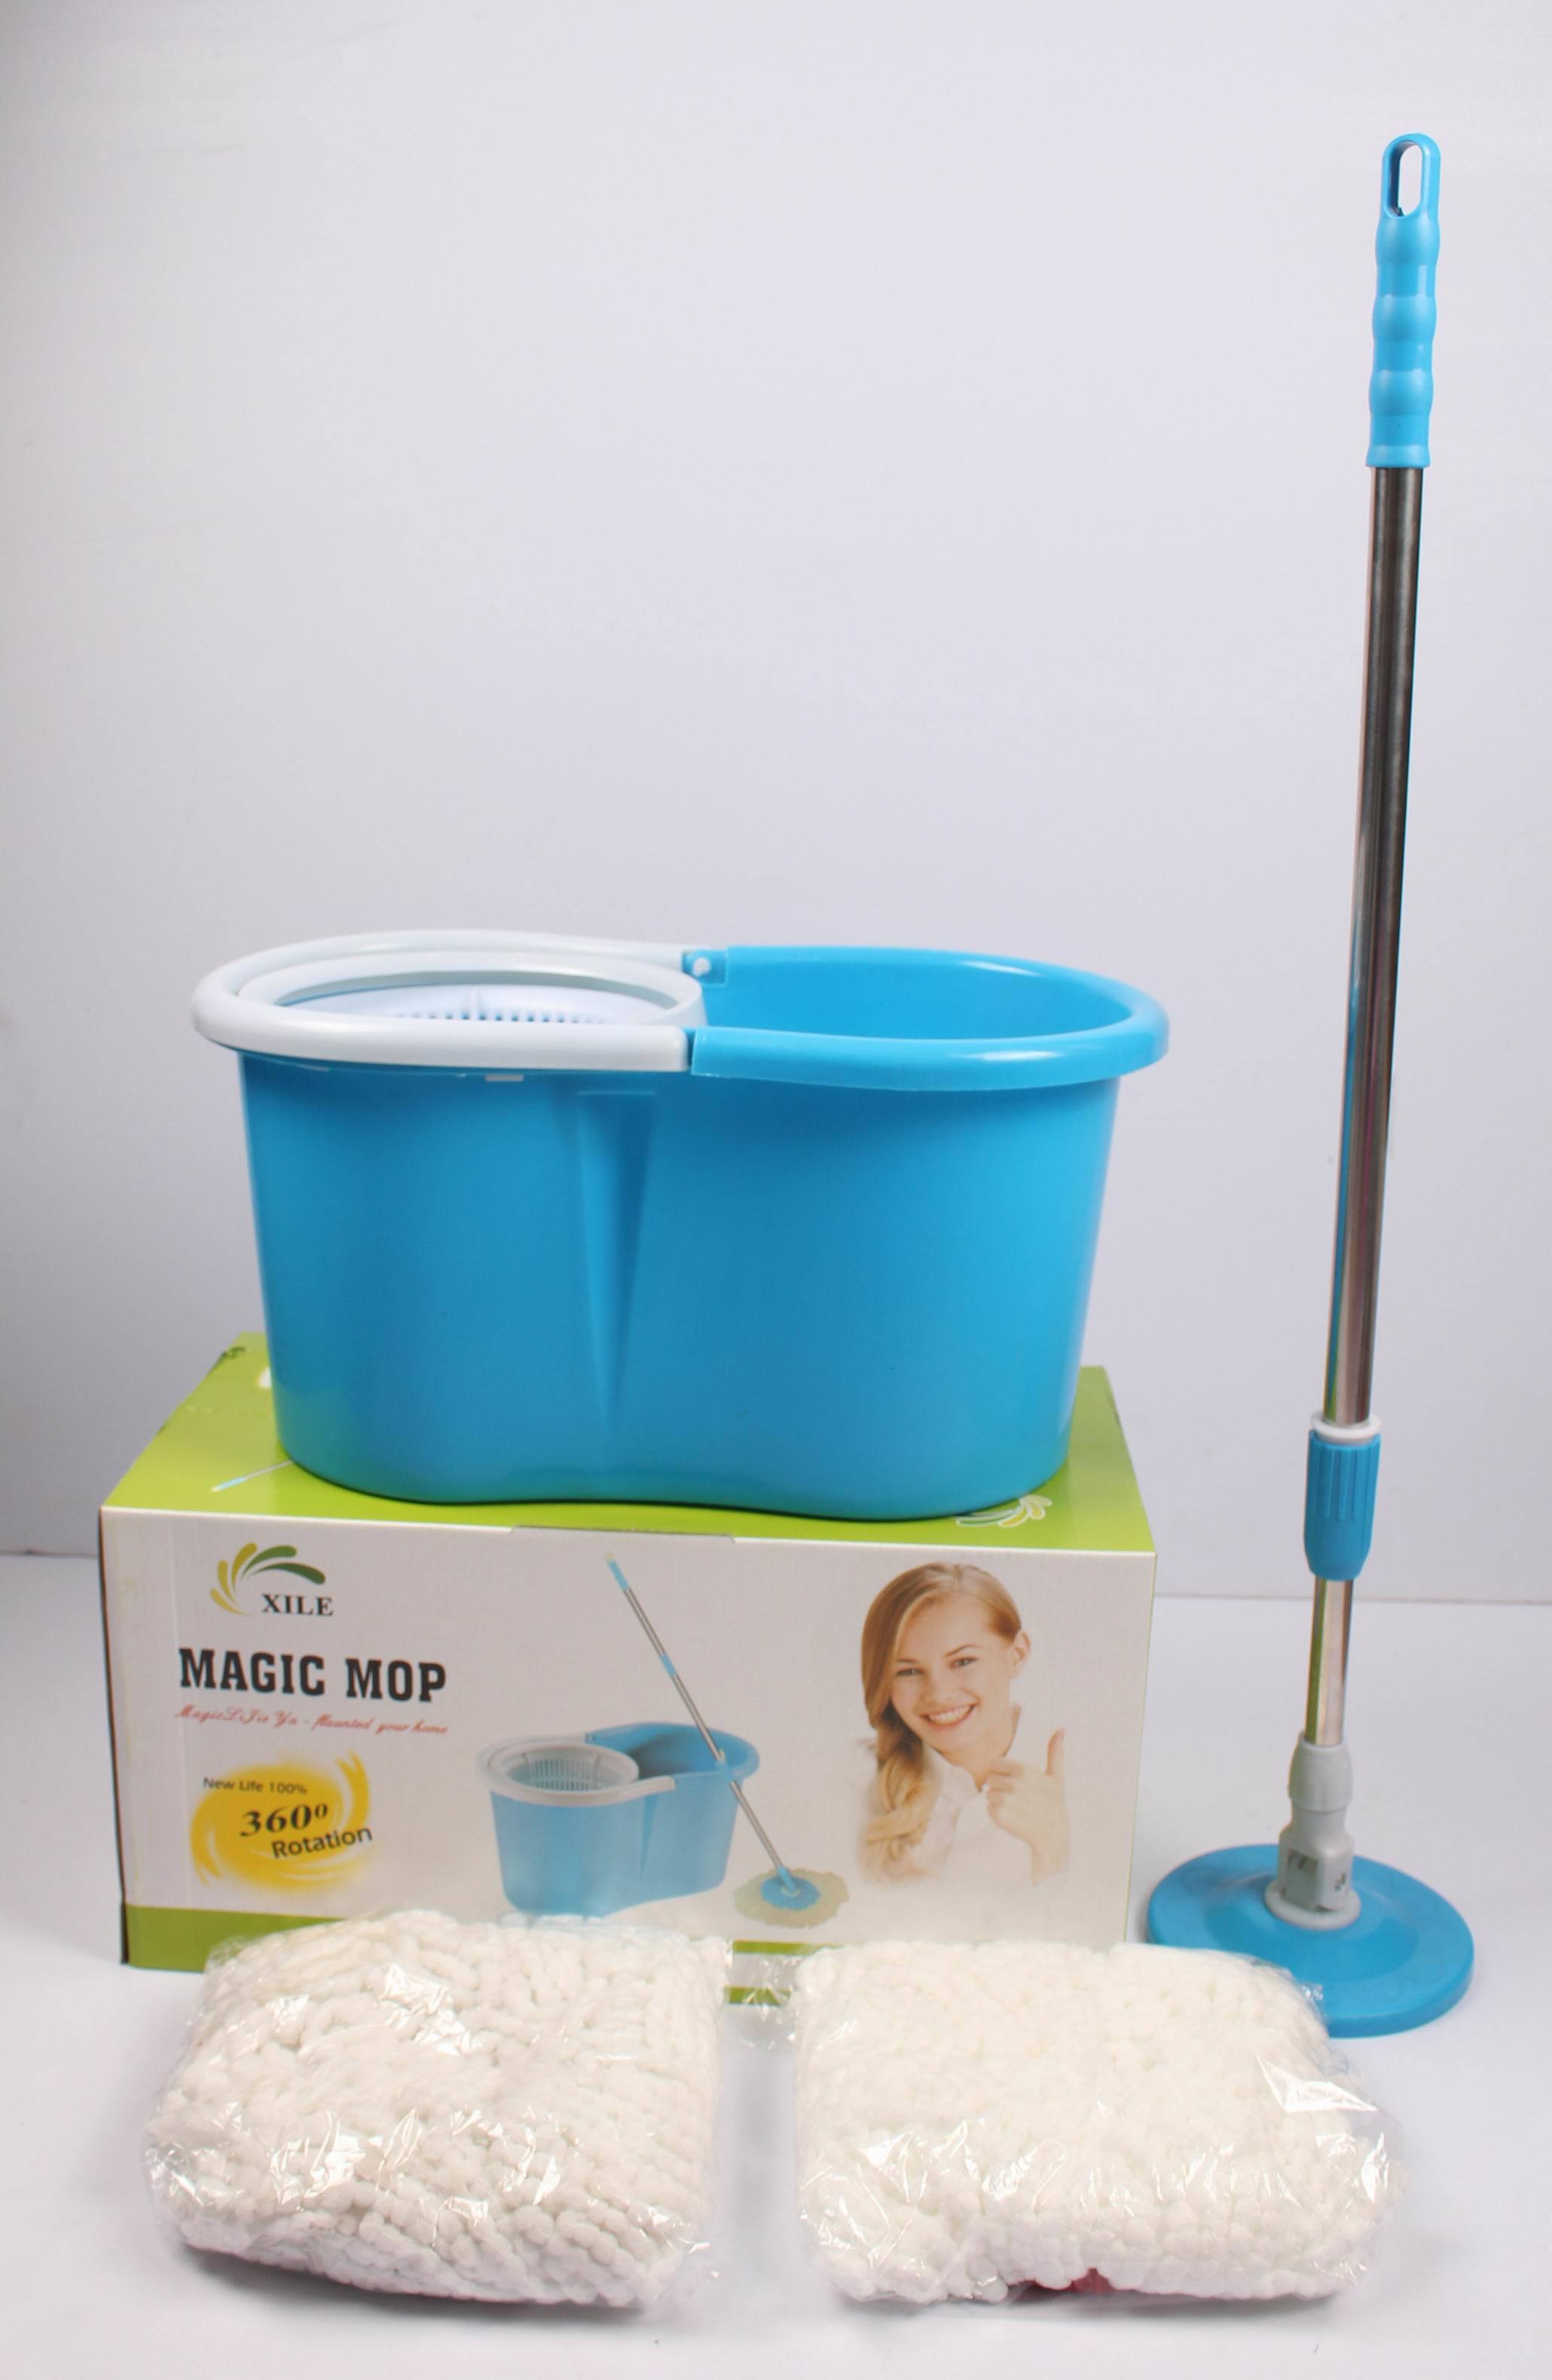 Magic Spin Floor Cleaning Mops with Blue Color